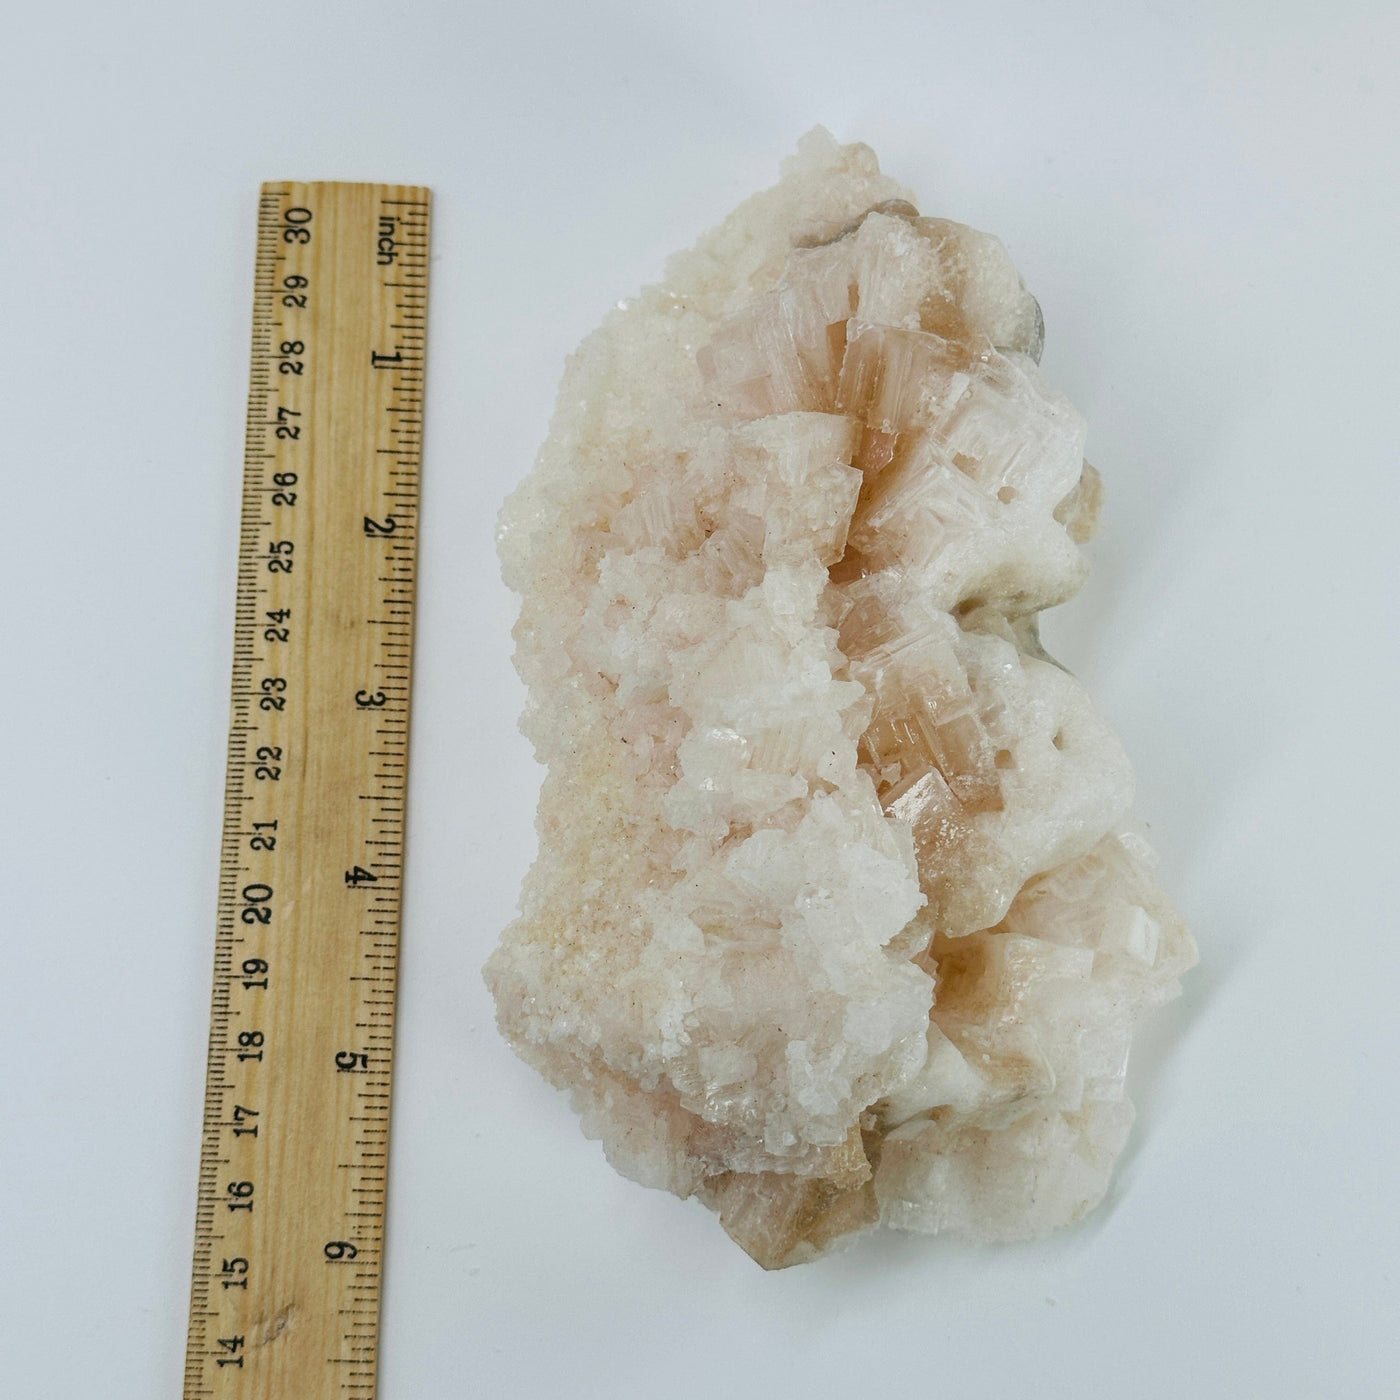 pink halite cluster next to a ruler for size reference